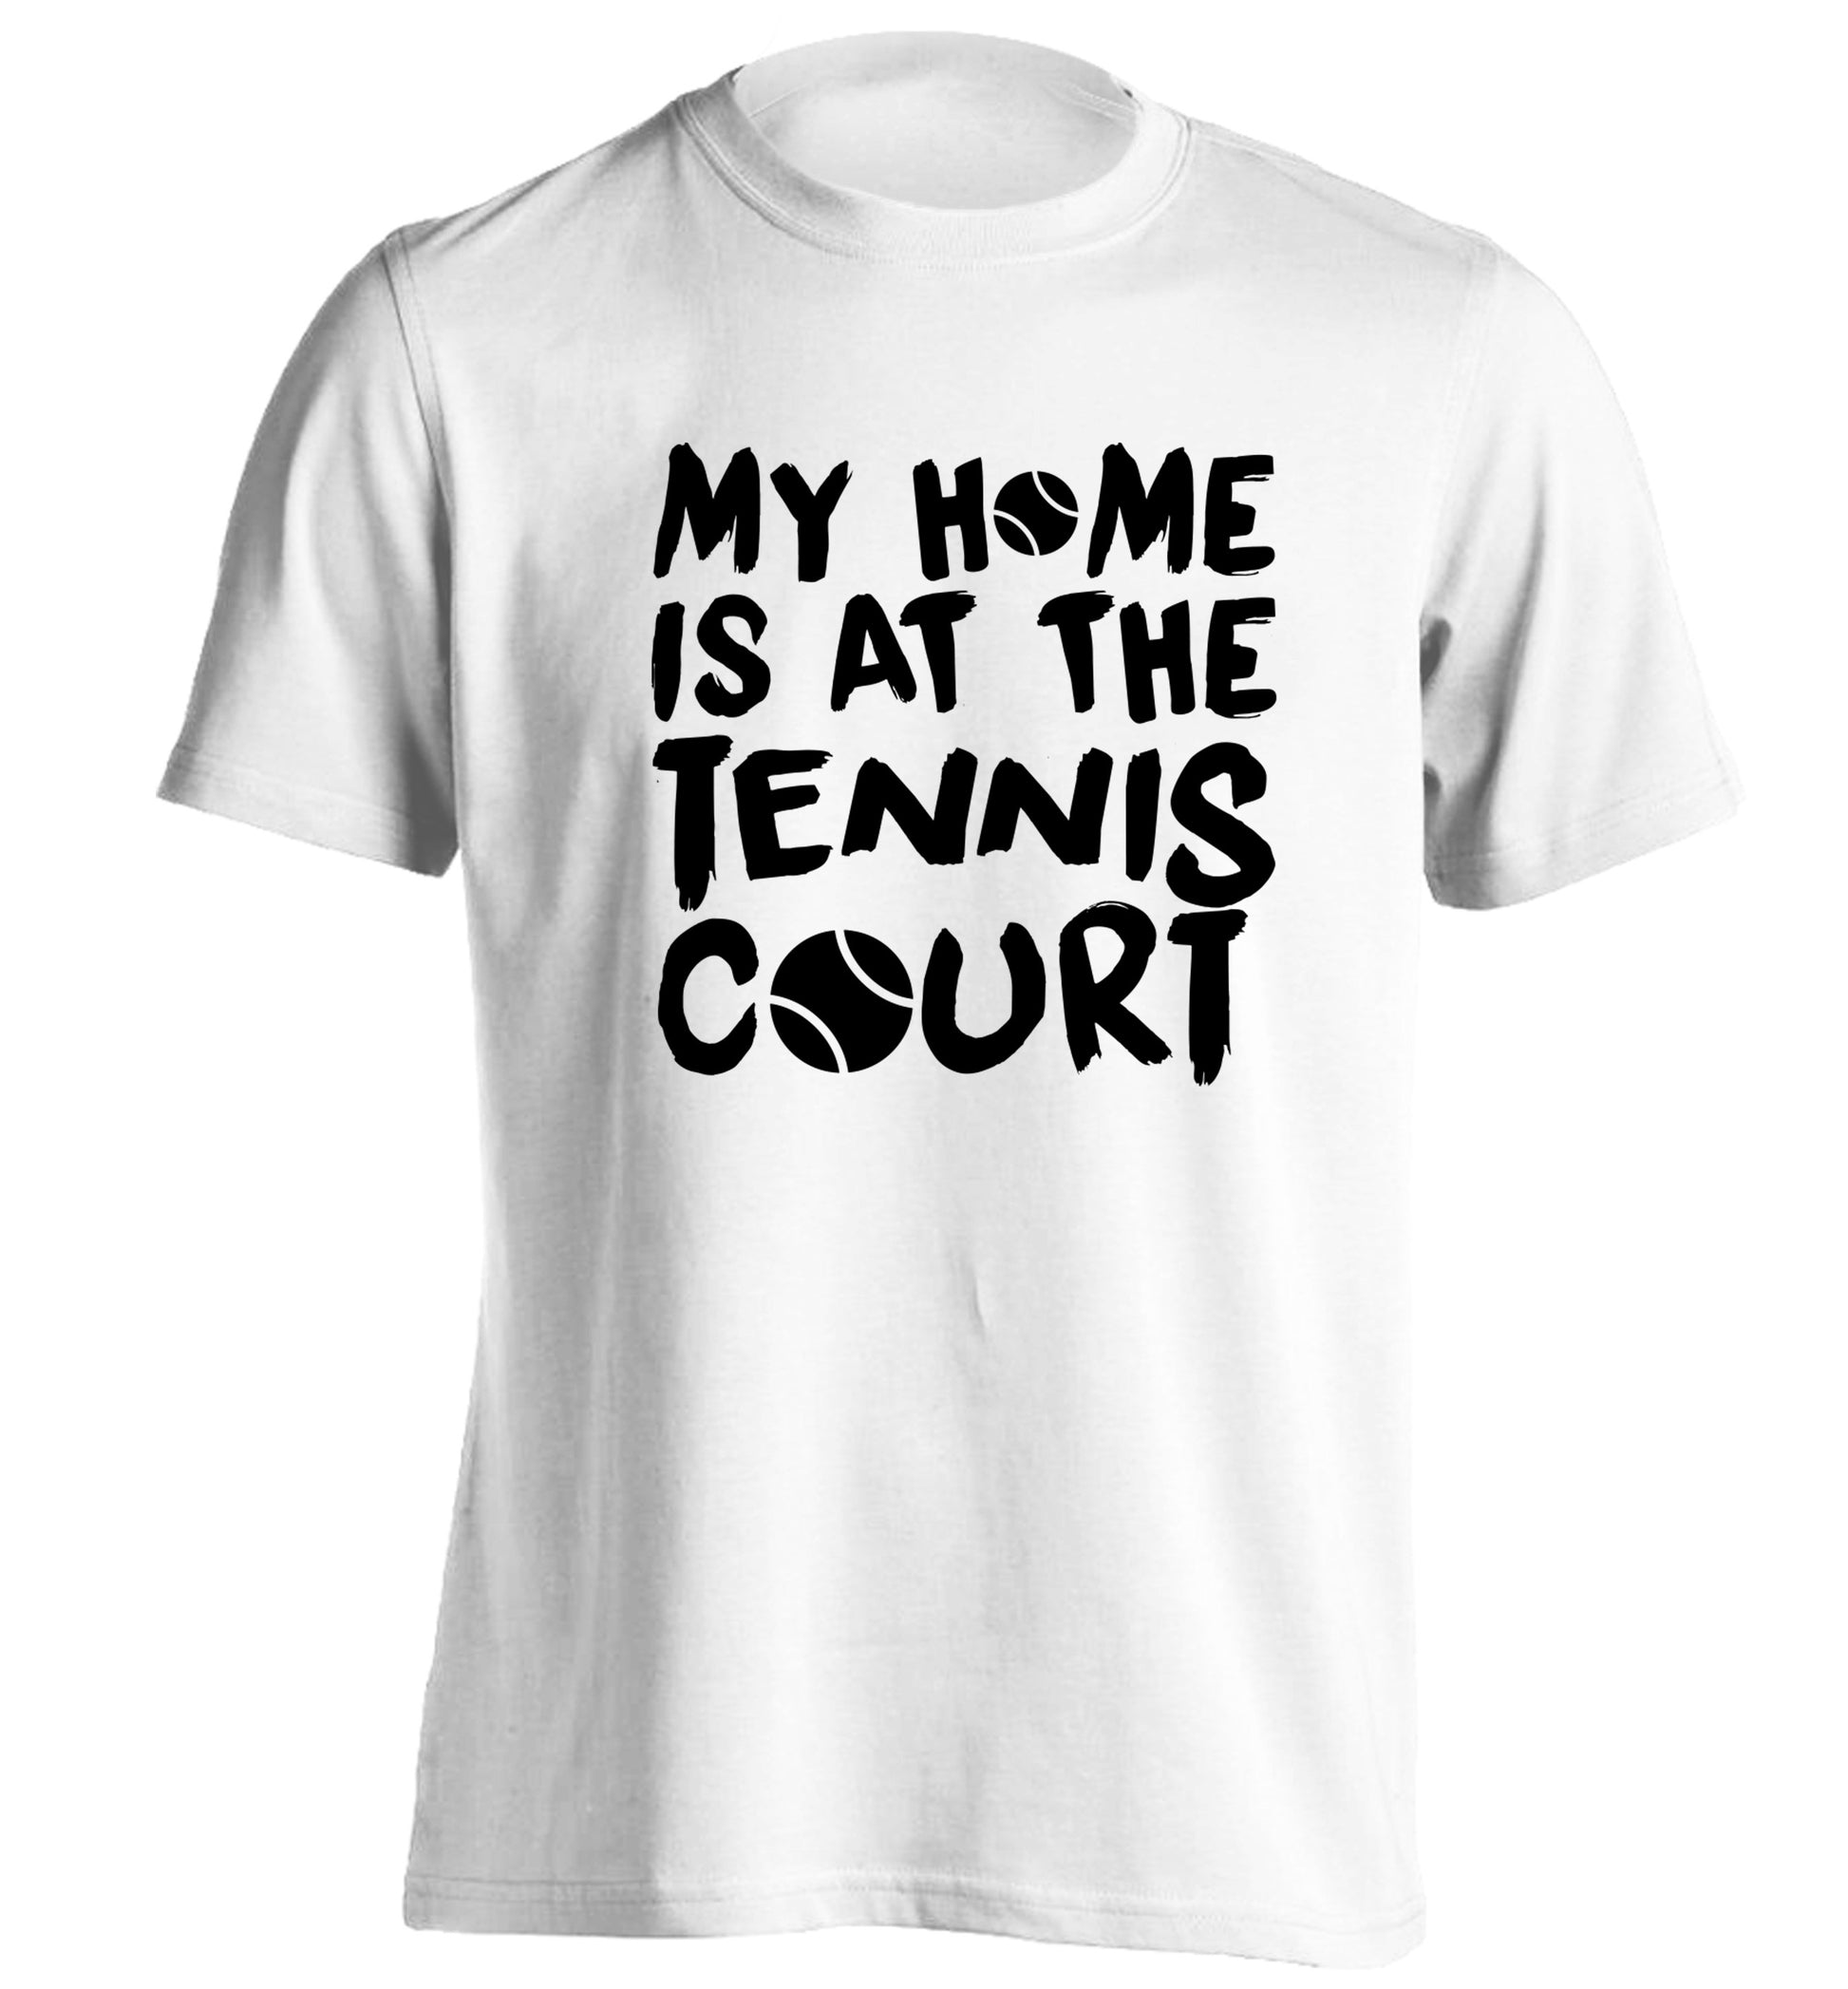 My home is at the tennis court adults unisex white Tshirt 2XL